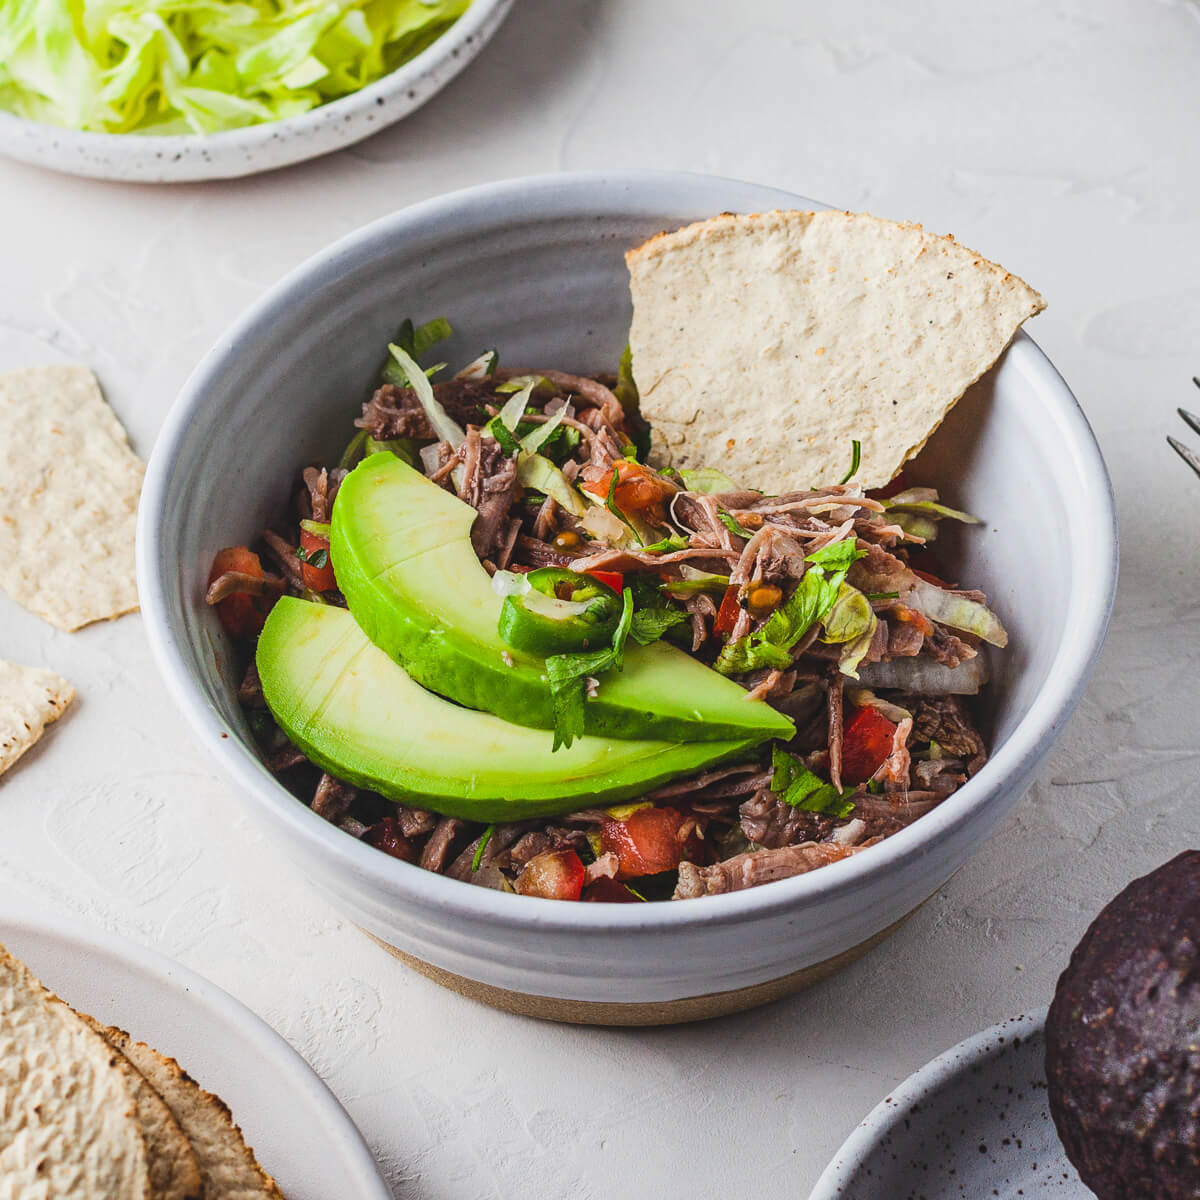 A white bowl filled with brightly coloured Salpicón (Mexican Shredded Meat Salad) topped with sliced avocado.